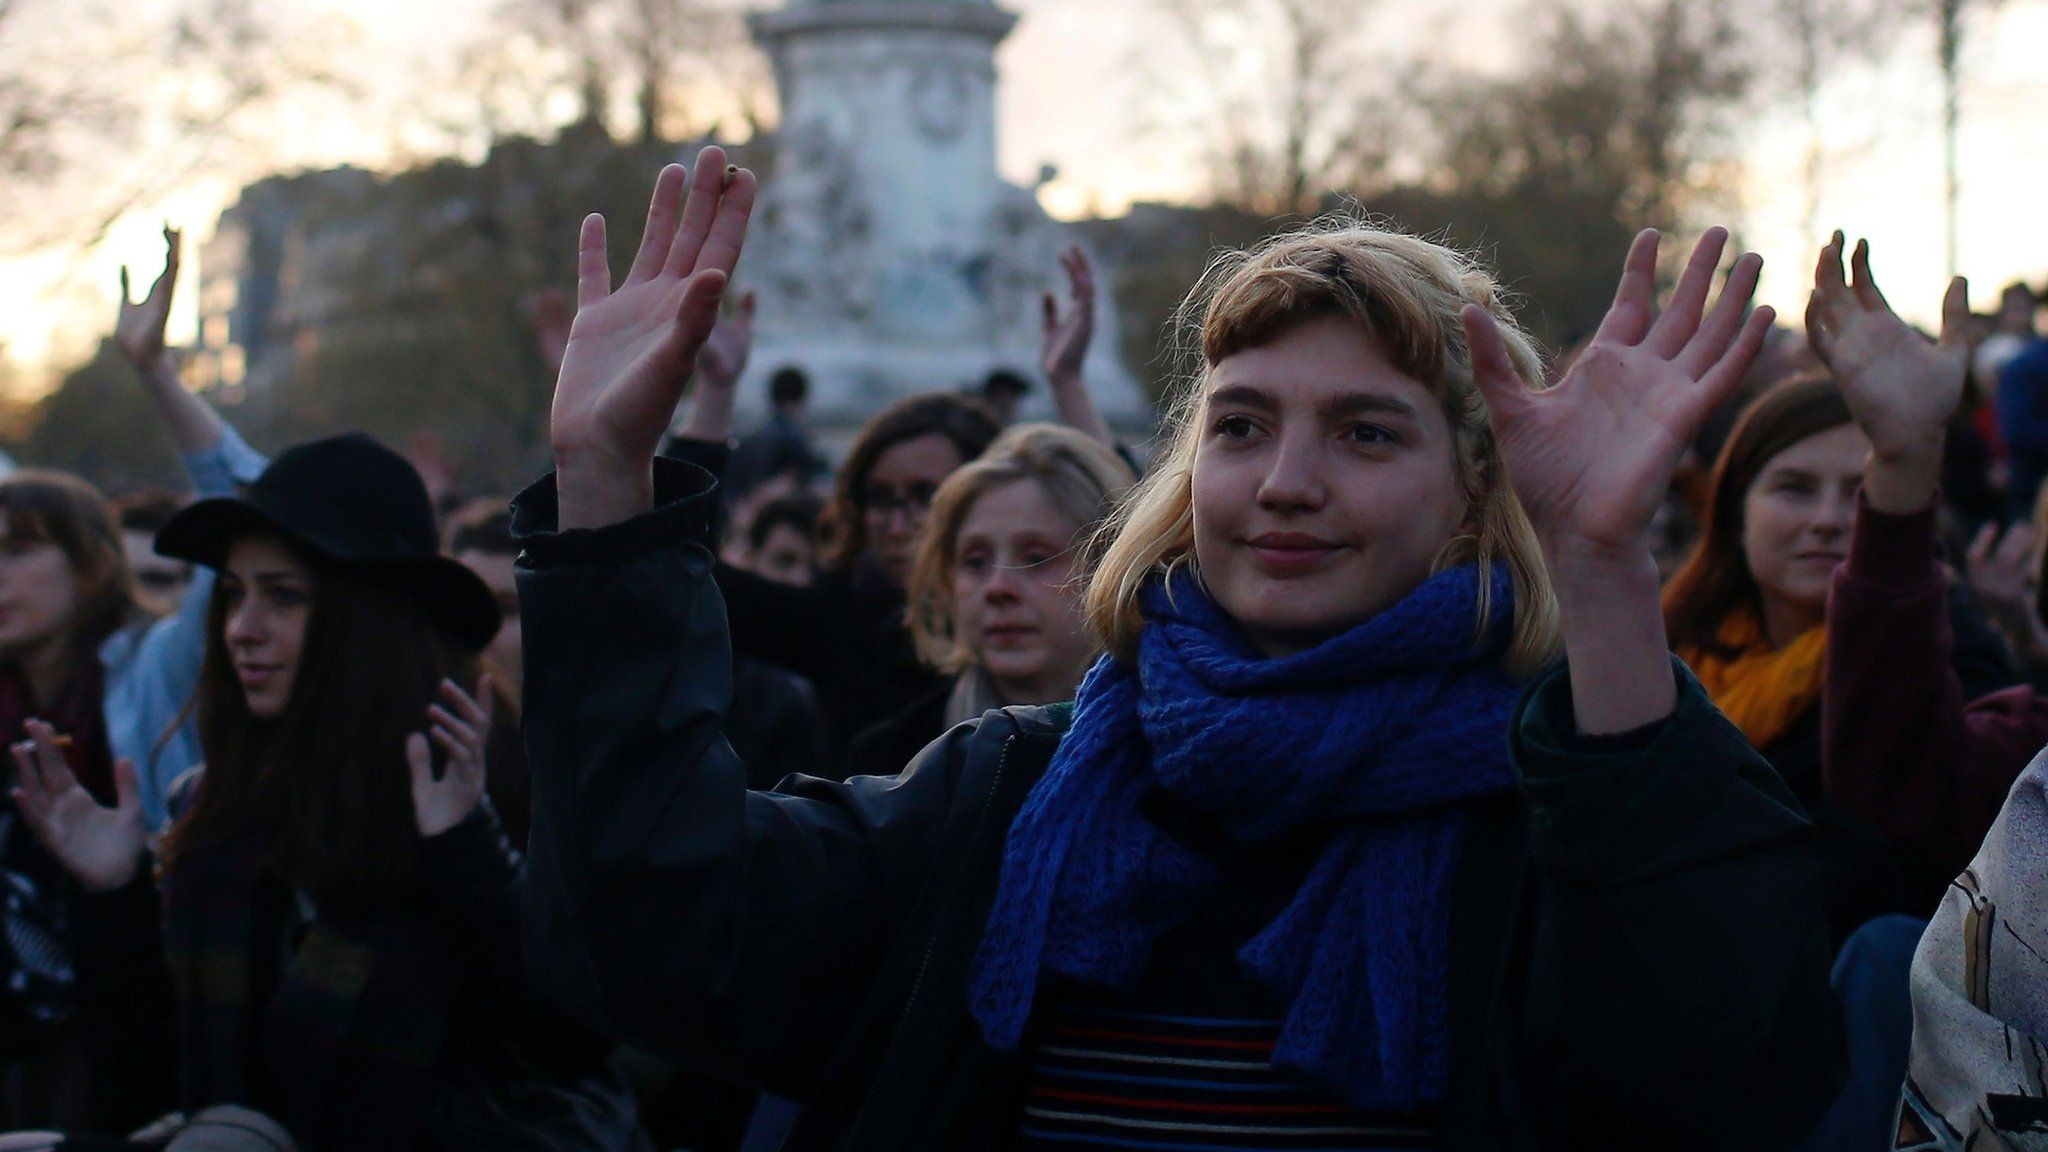 People gesture as they listen to a speech during a gathering by the 'Nuit Debout' movement on Place de la Republique in Paris